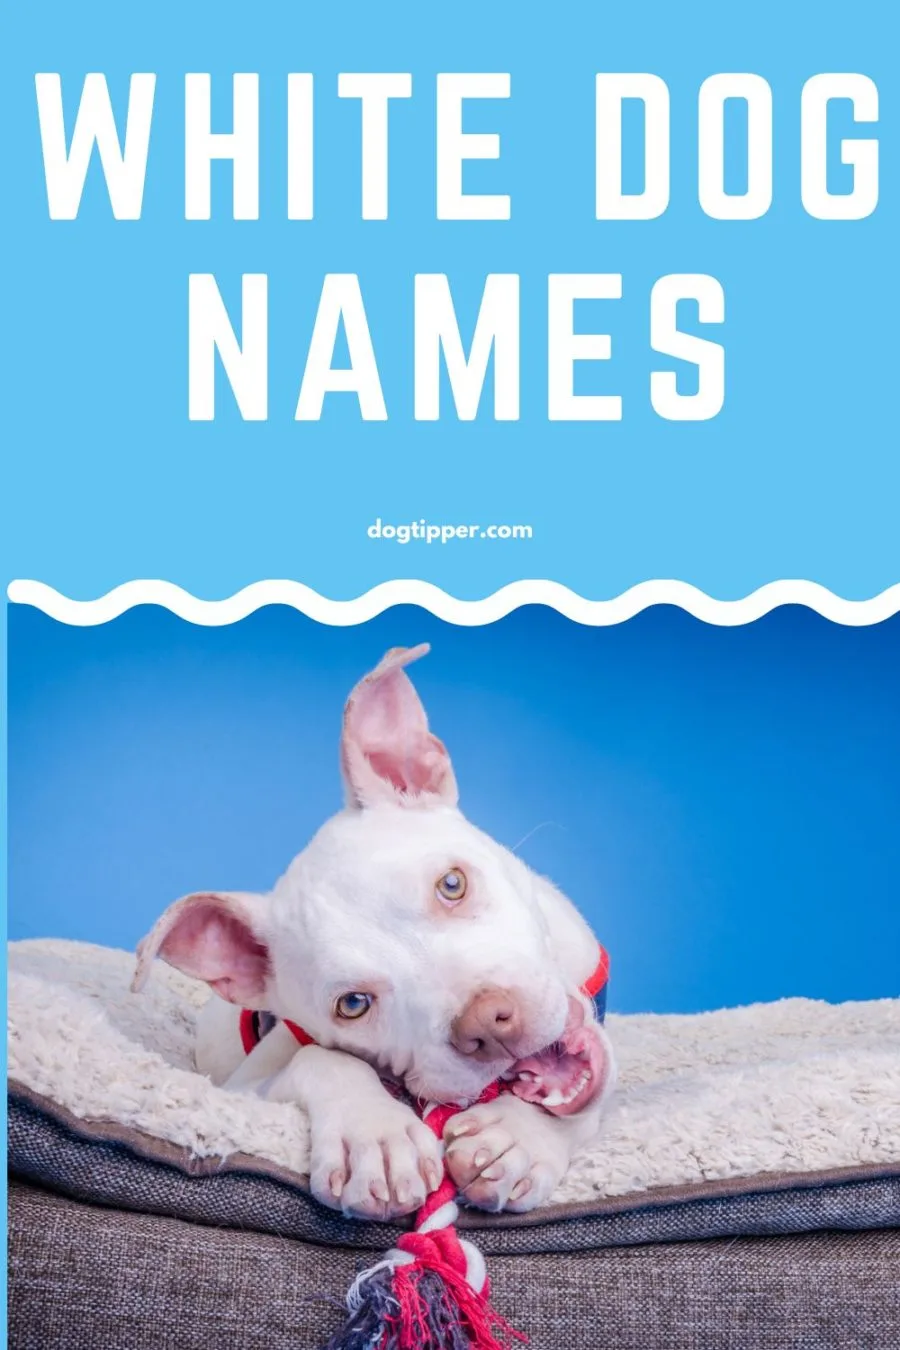 100+ White Dog Names for Your Fair Fur Baby